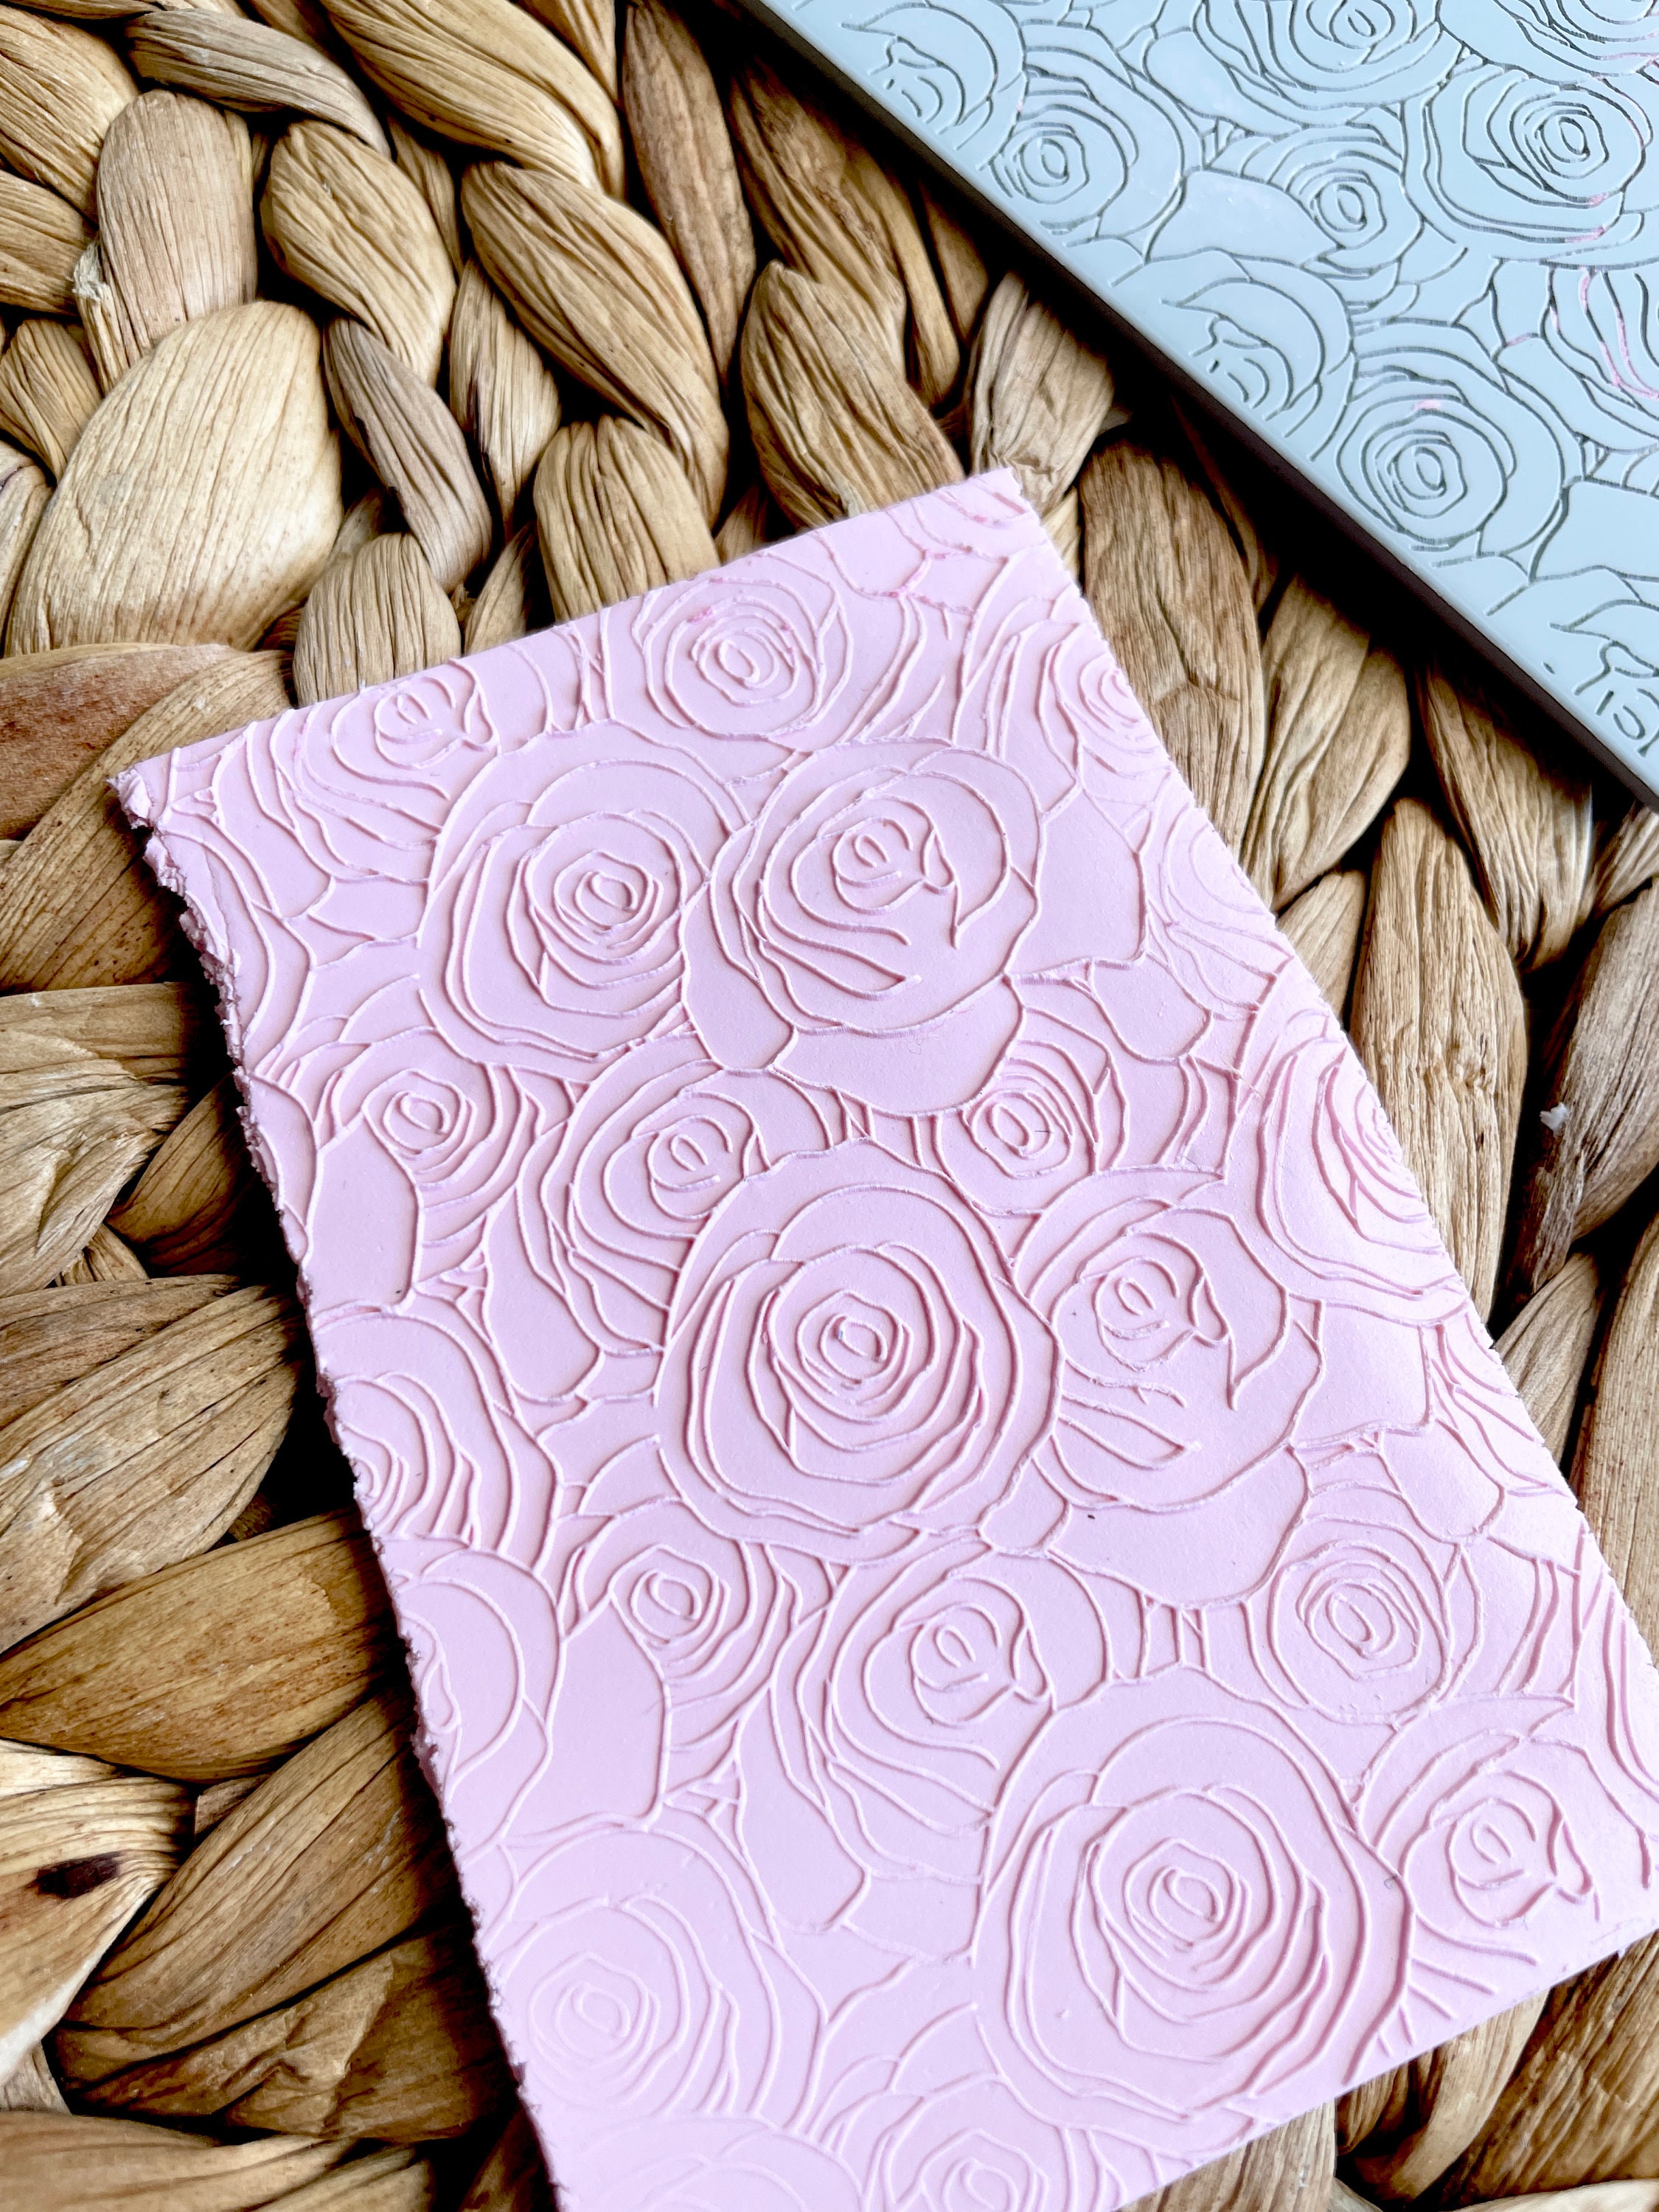 Polymer Clay Texture Stamp Sheets DIY Emboss Pattern Large Sunflower/  Daisy/Butterfly Design Texture Mats for Clay Pottery Tools